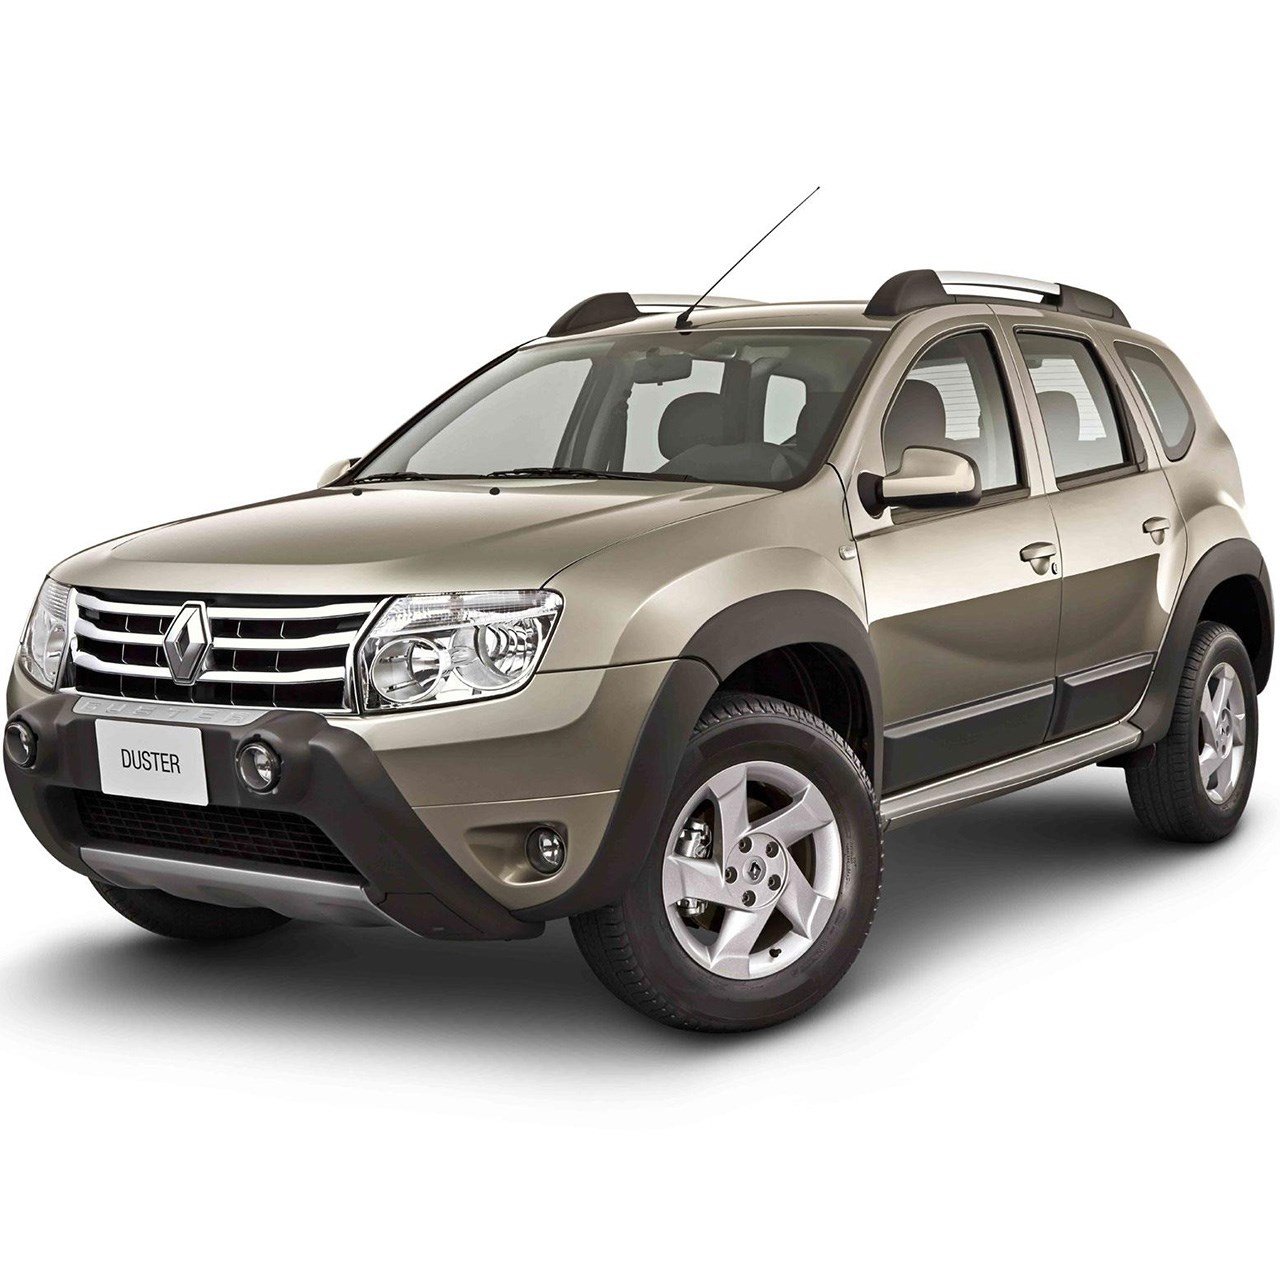 Дастер 4wd 2.0. Renault Duster 2015. Рено Дастер 4вд. Рено Дастер 2015. Renault Duster 2012.